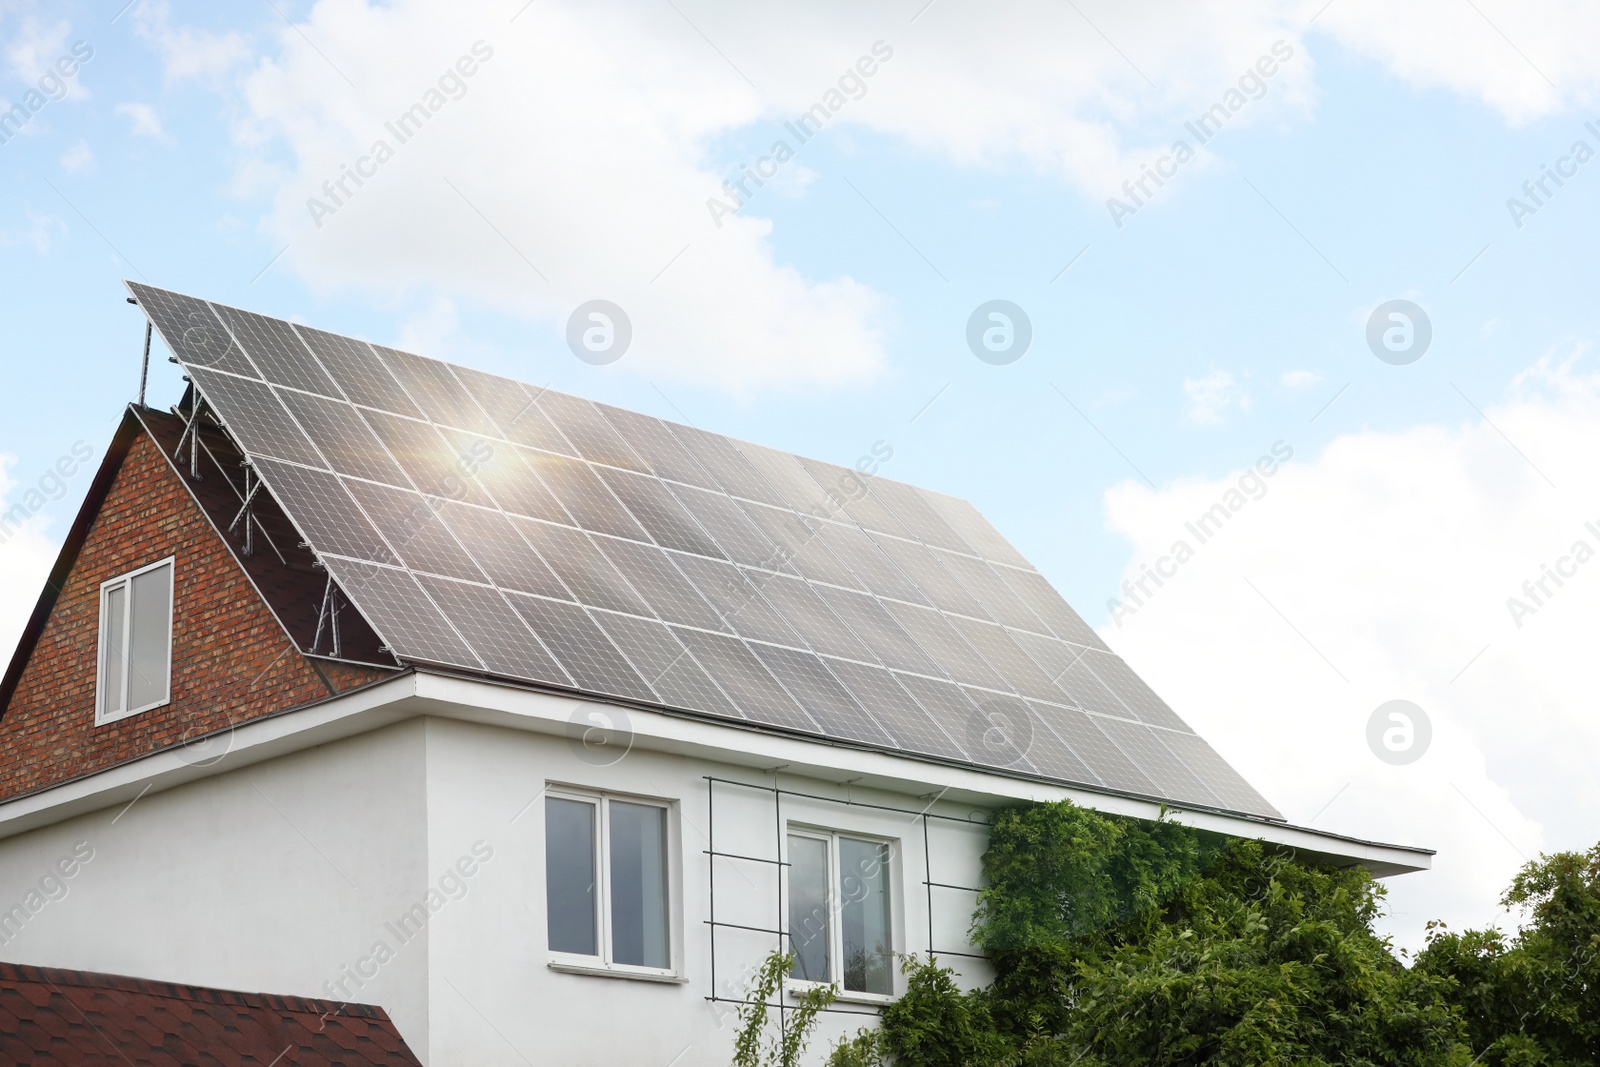 Photo of Building with installed solar panels on roof. Alternative energy source